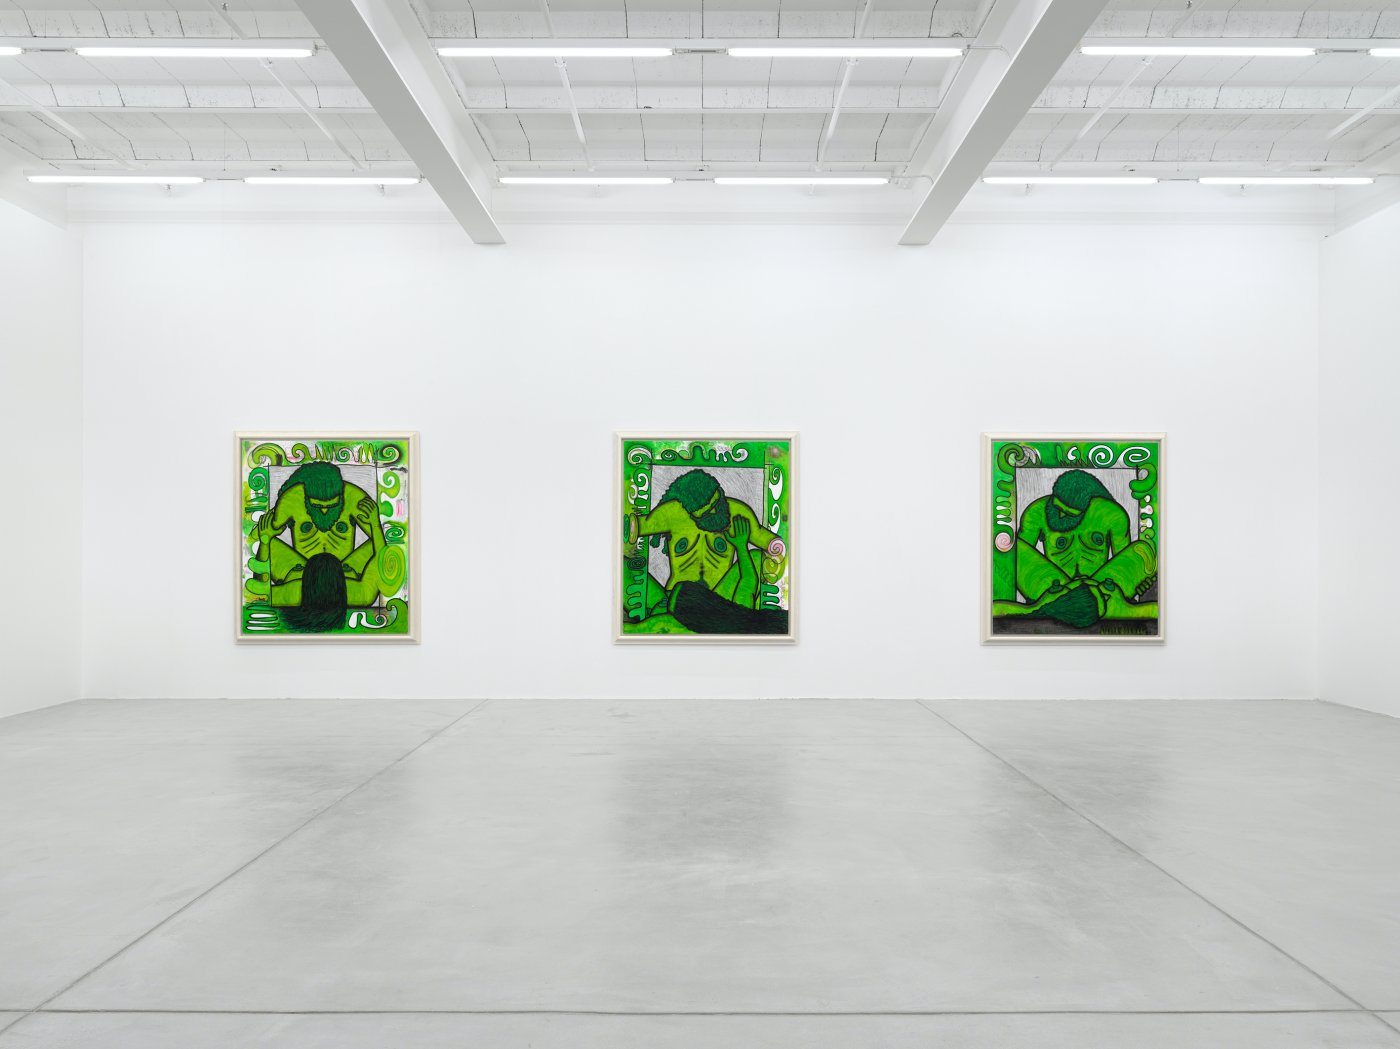 Installation image for Carroll Dunham: Qualiascope Paintings and Related Drawings, at Galerie Eva Presenhuber